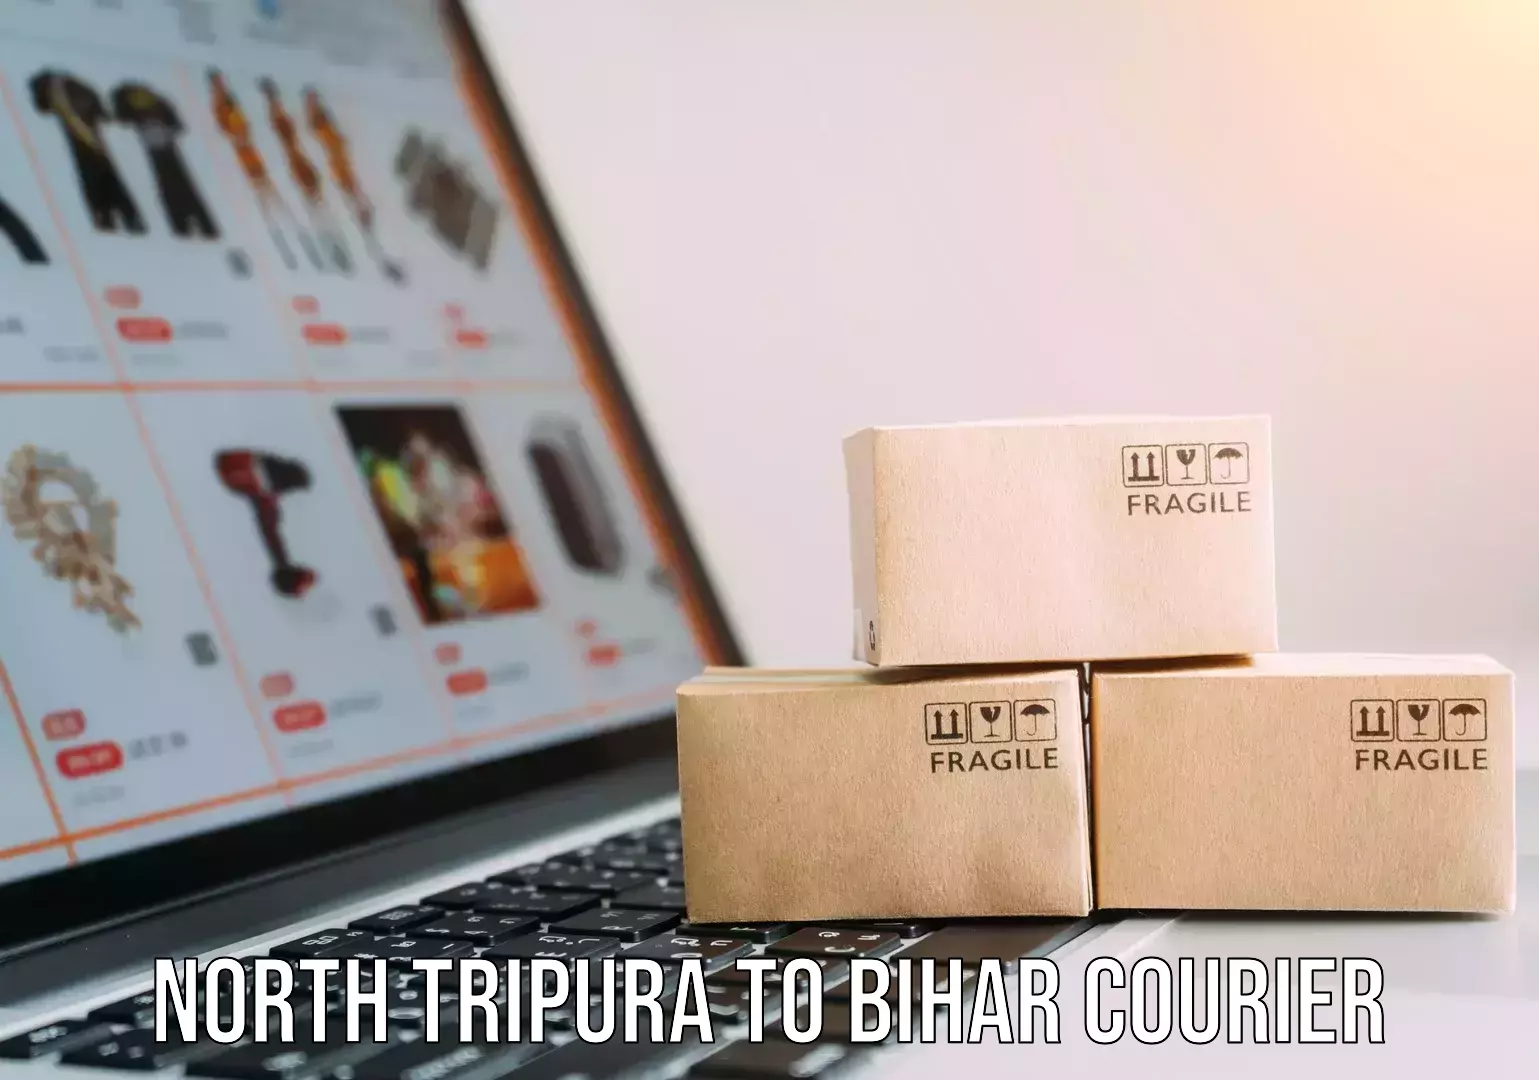 State-of-the-art courier technology North Tripura to Bihar